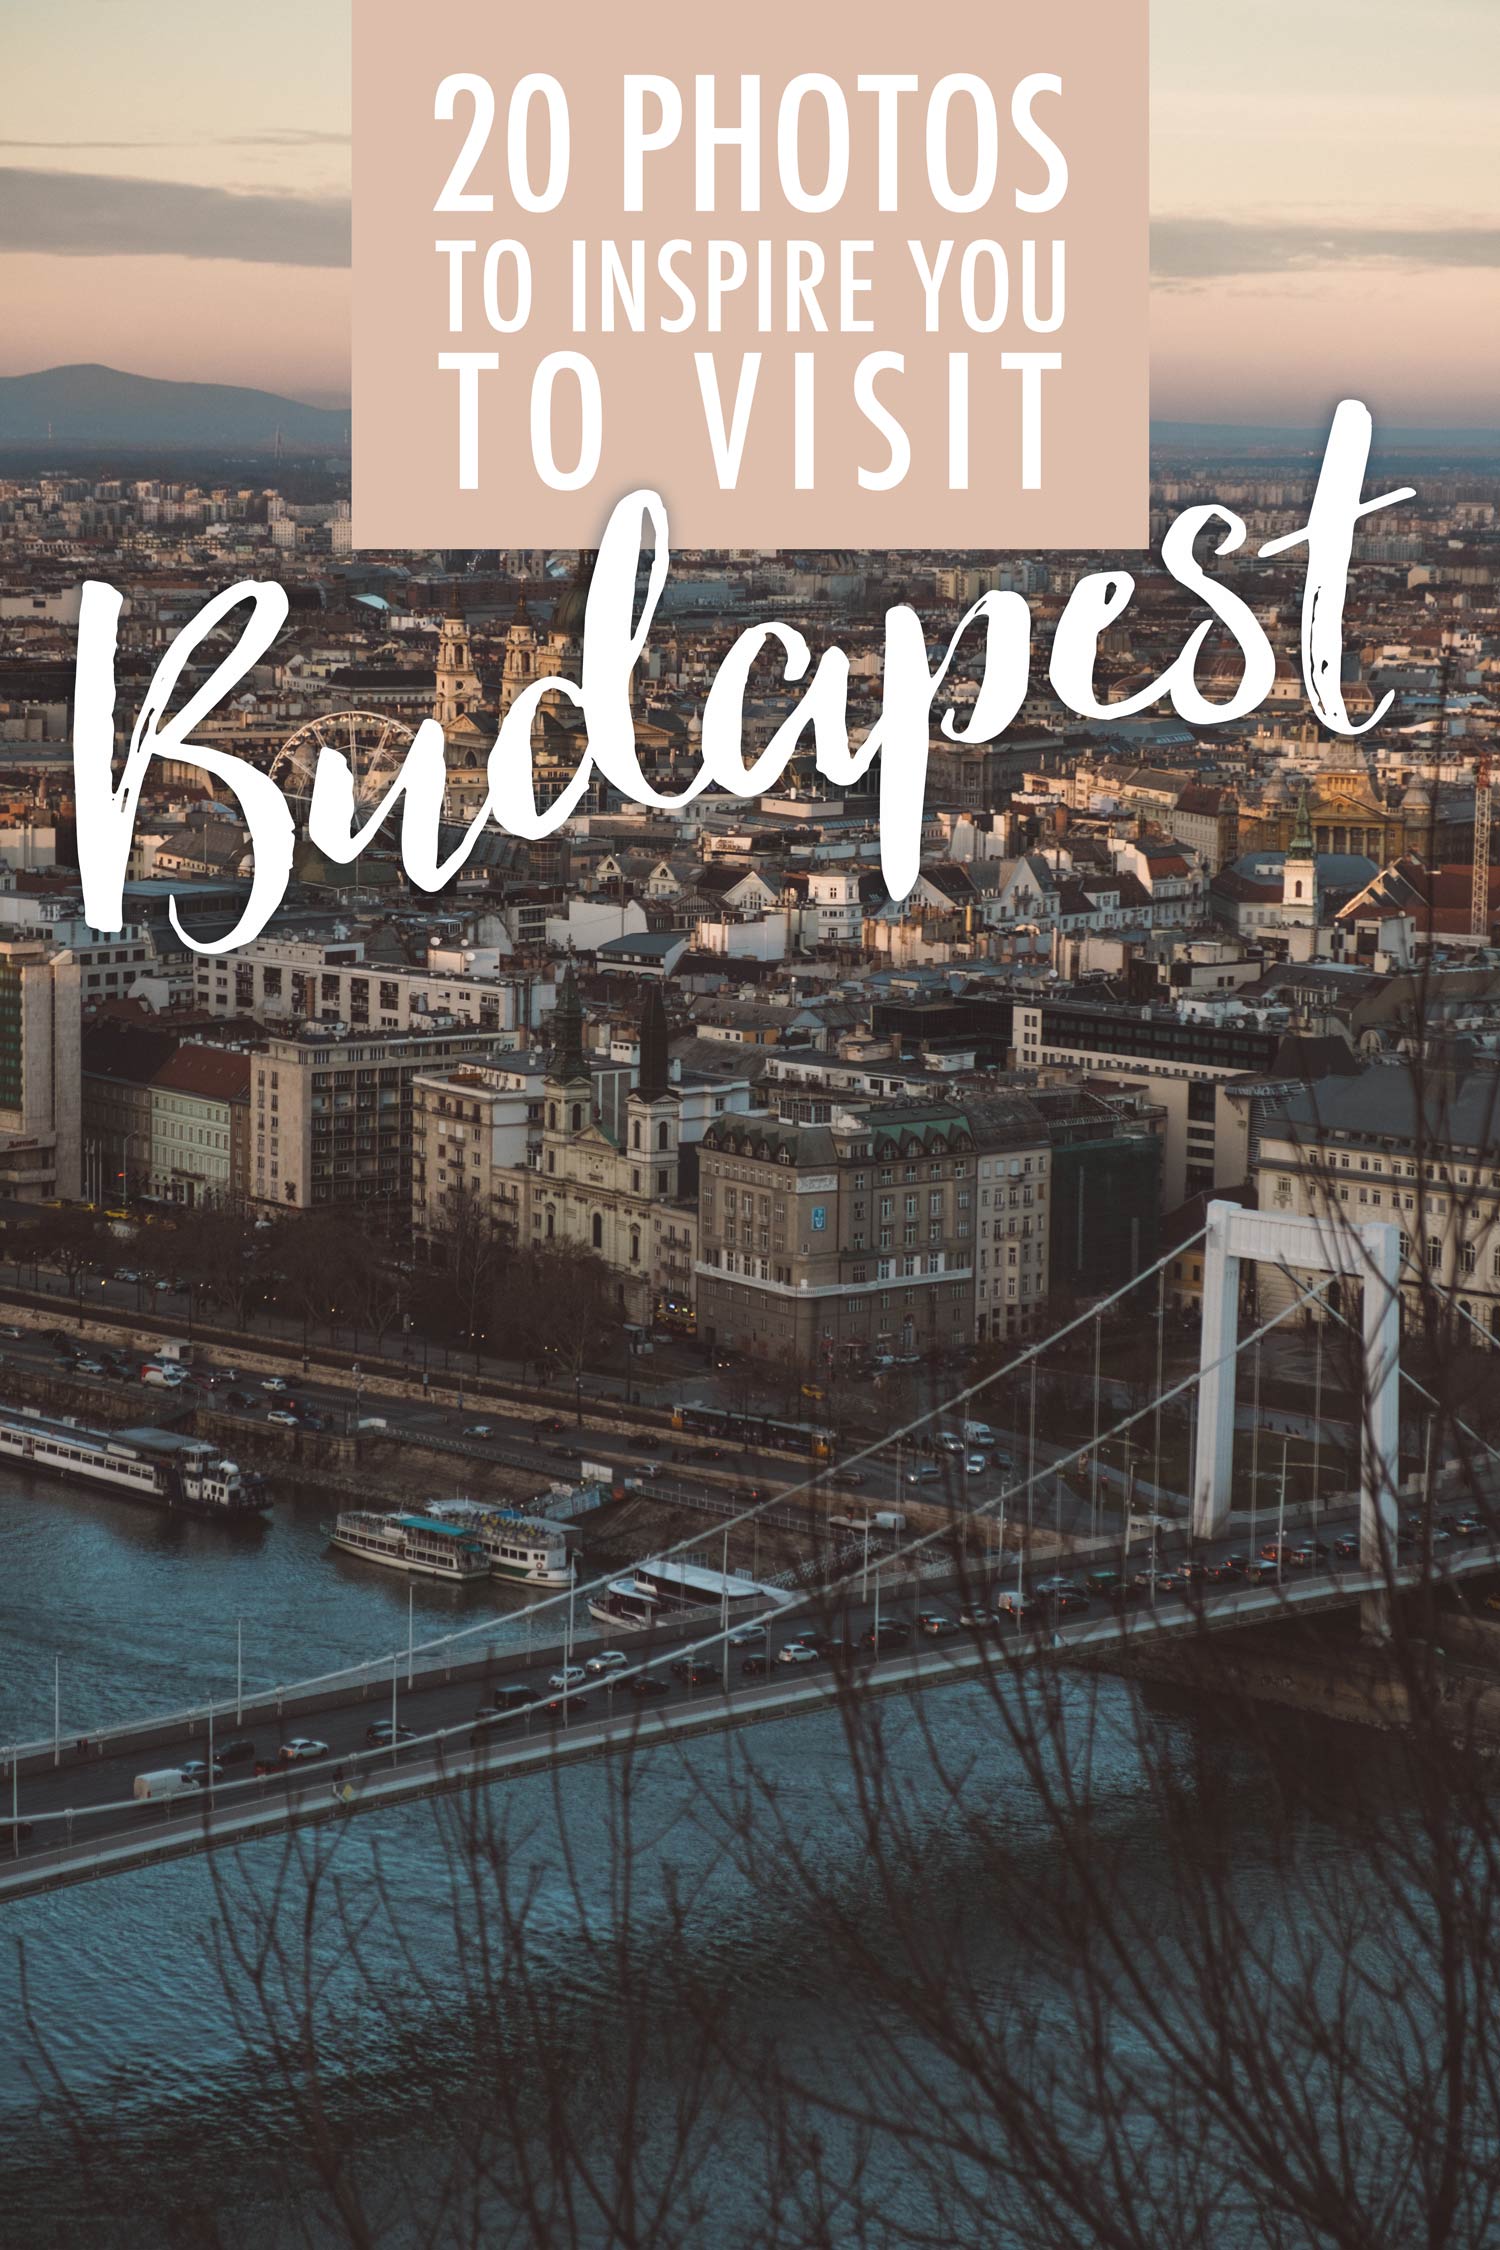 20 Photos to Inspire You to Visit Budapest